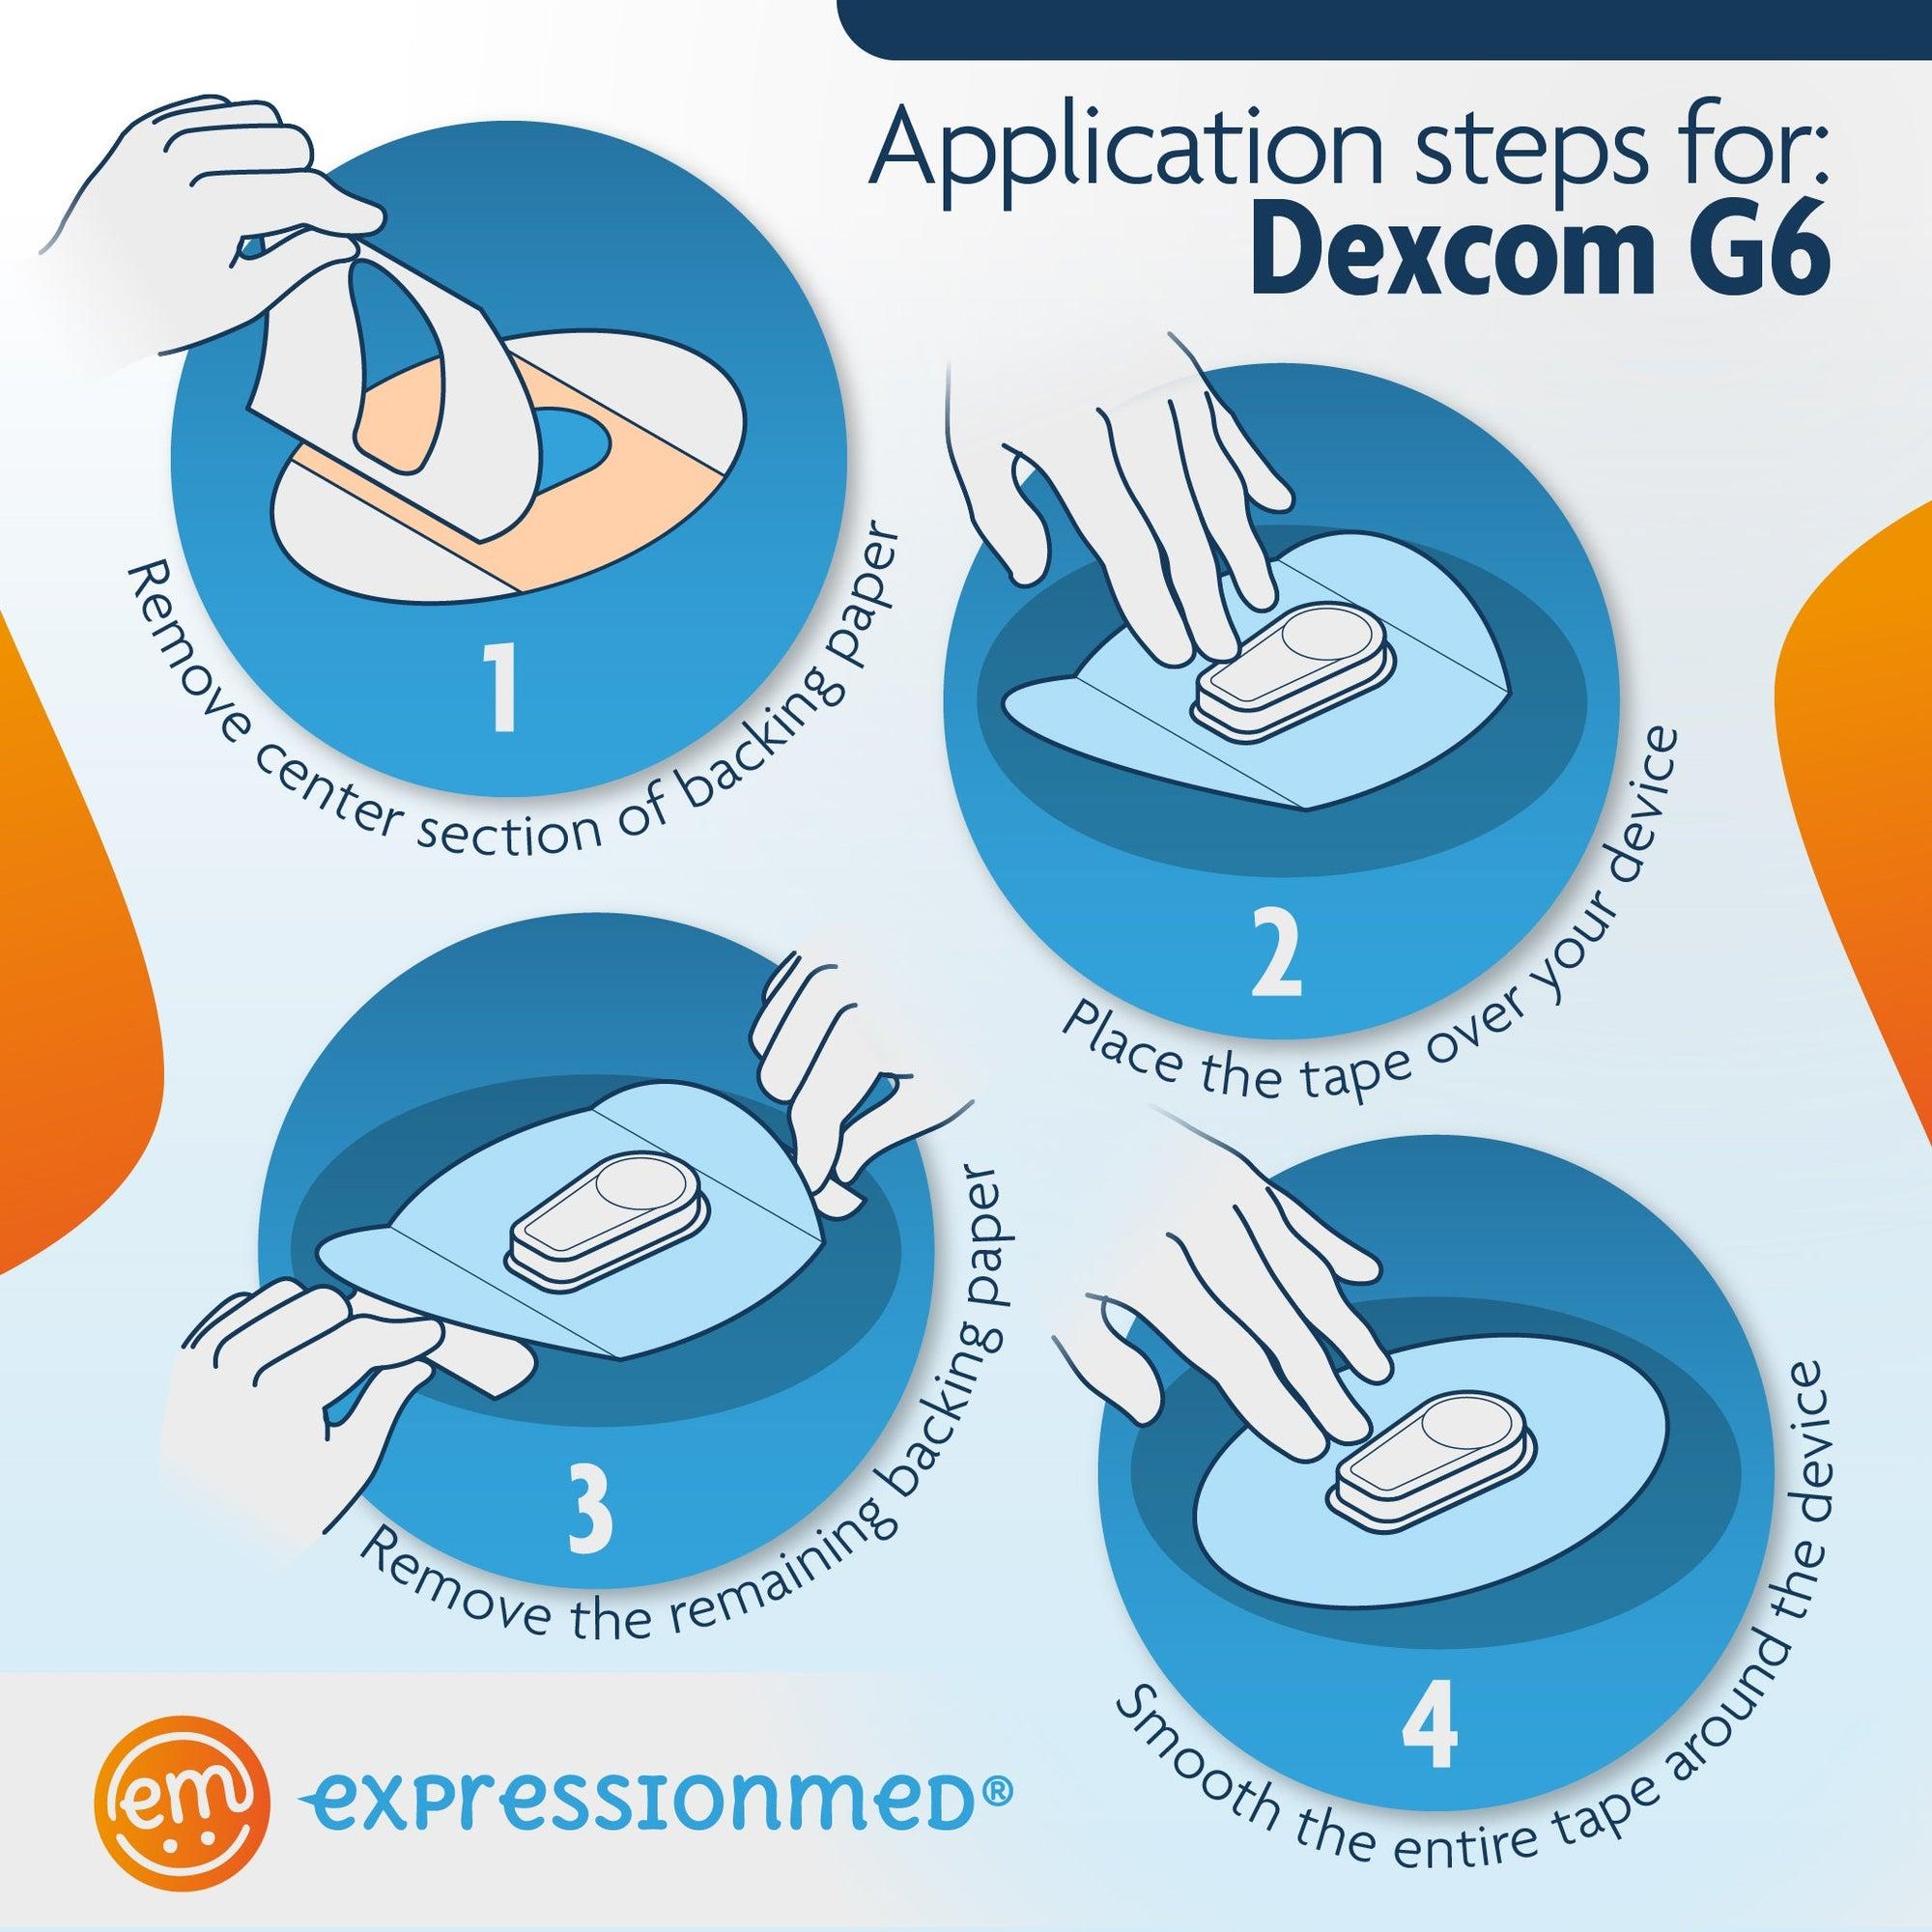 Application instructions how to apply Dexcom g6 regular prep skin with soap and water allow time to dry remove section A center section, lay hole over the device peel of both section b outer sections to remove hold an edge and stretch material off of skin